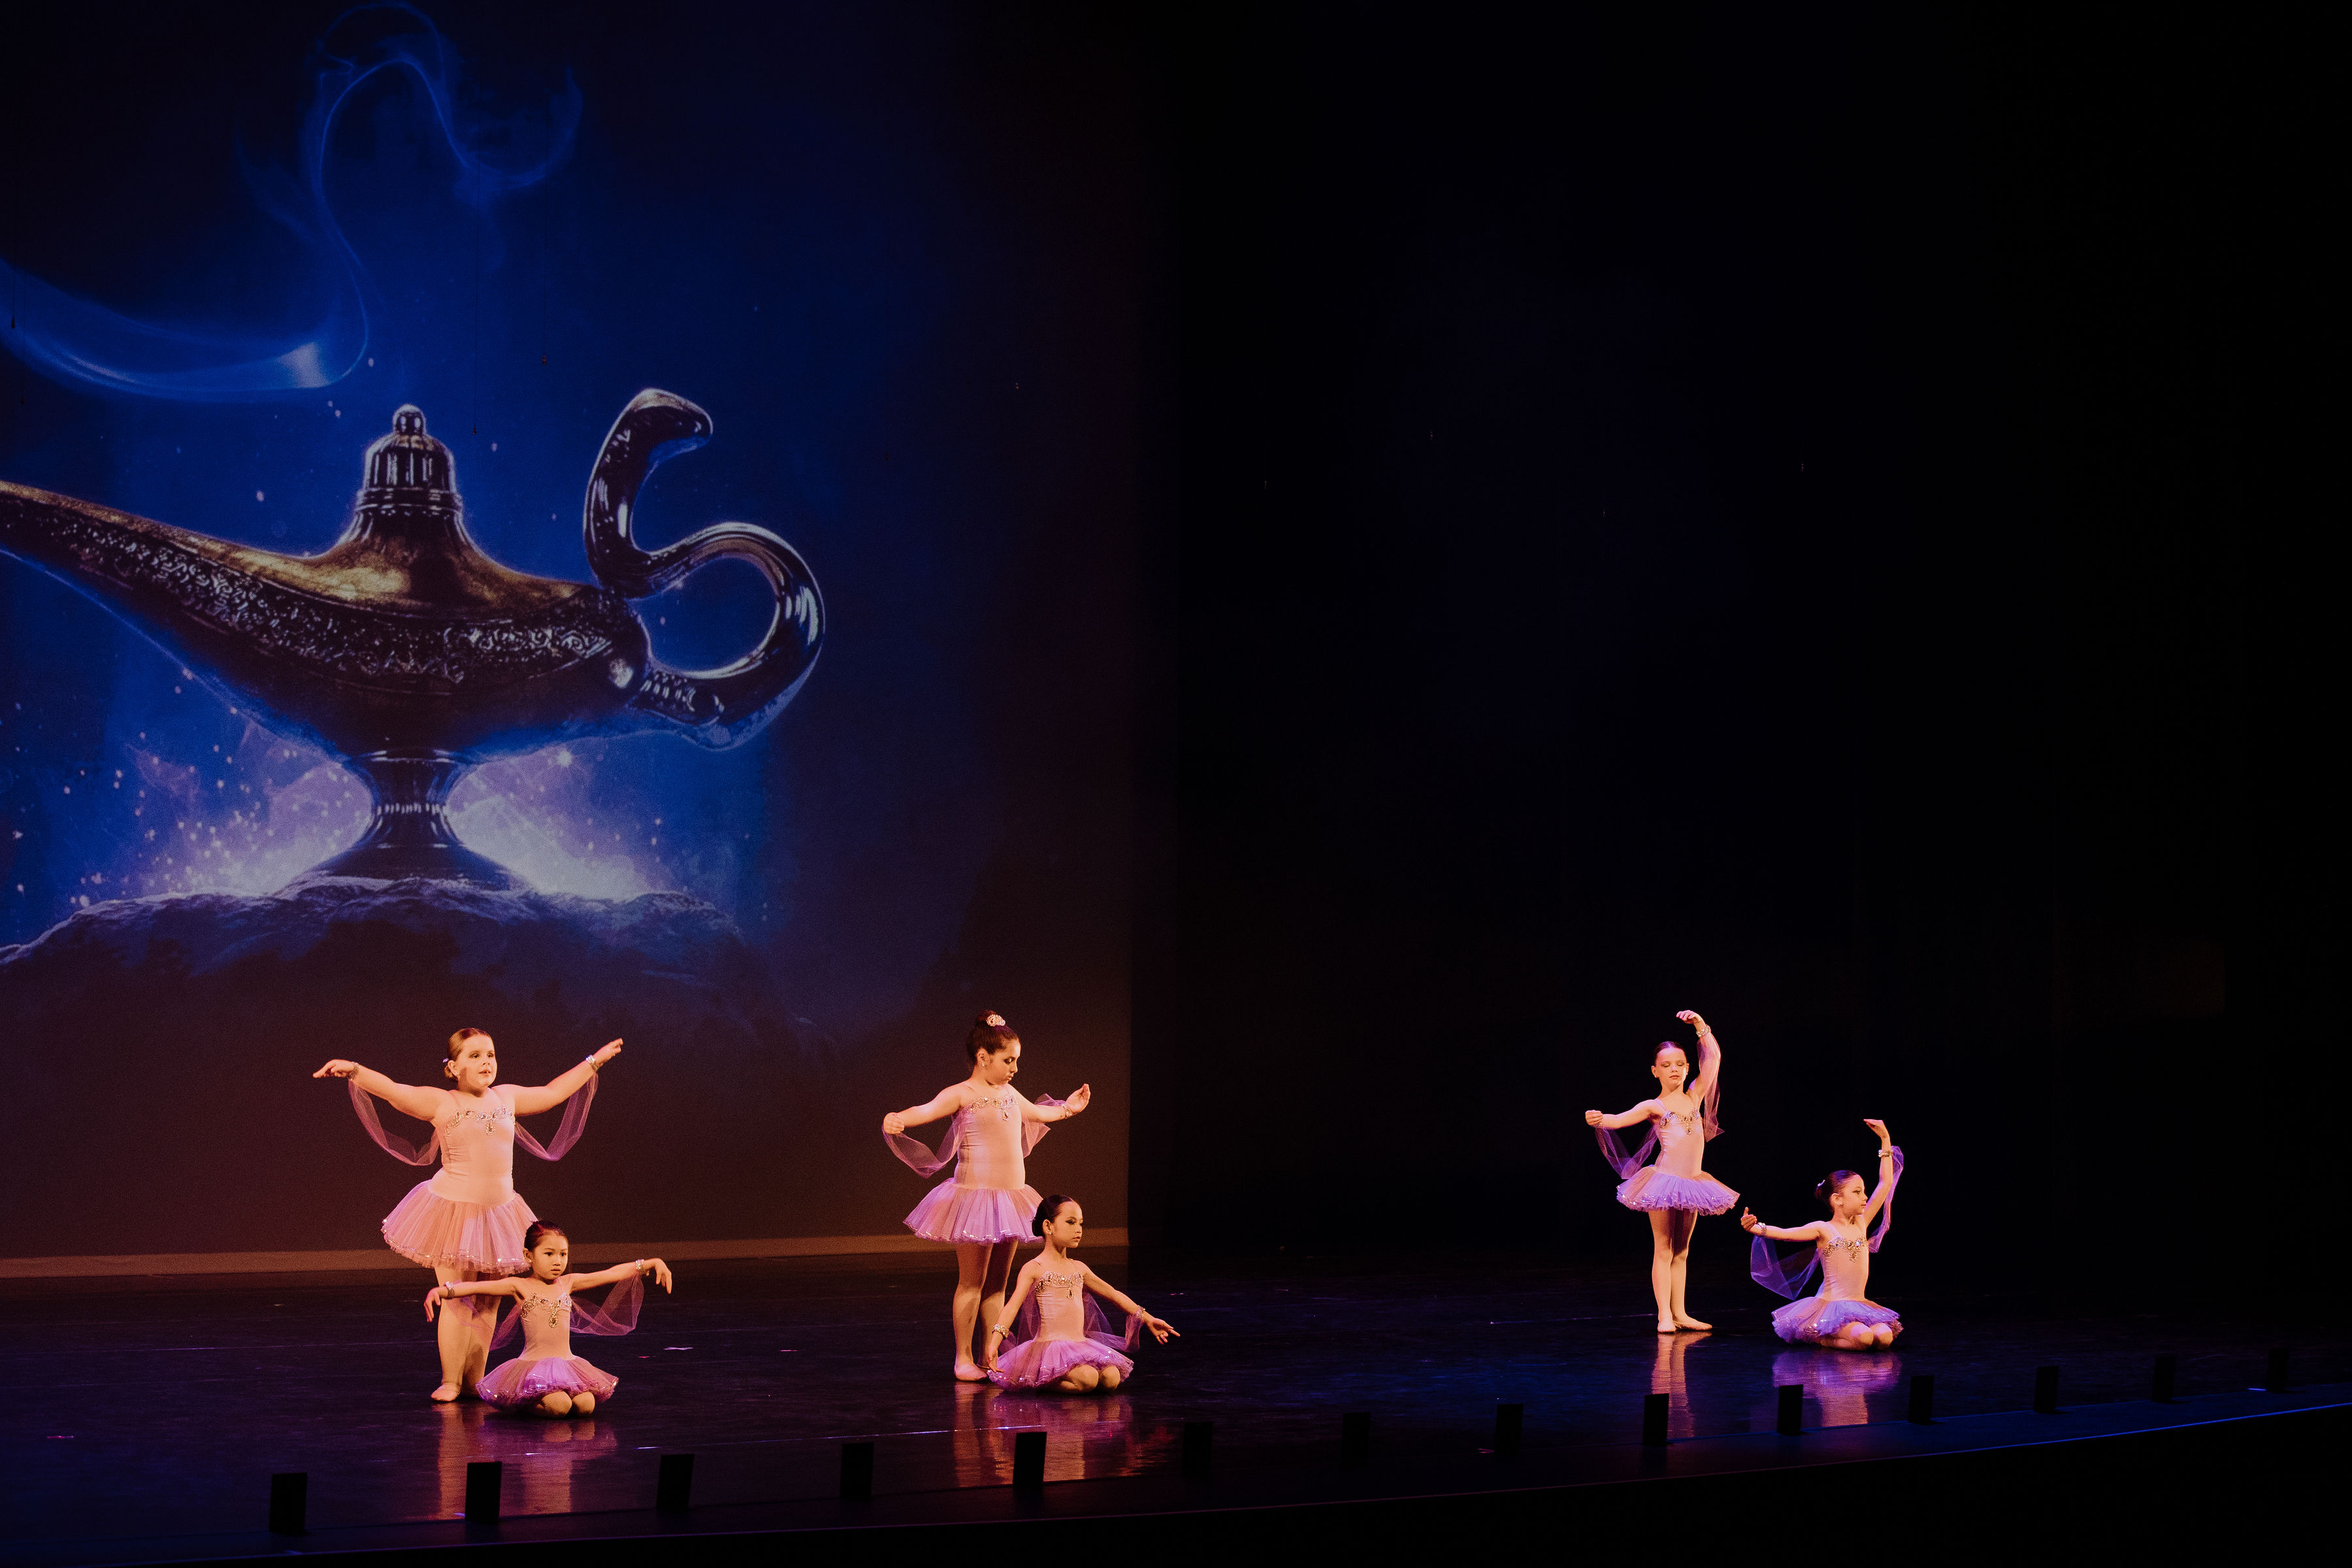 Six dancers performing ballet routine on stage